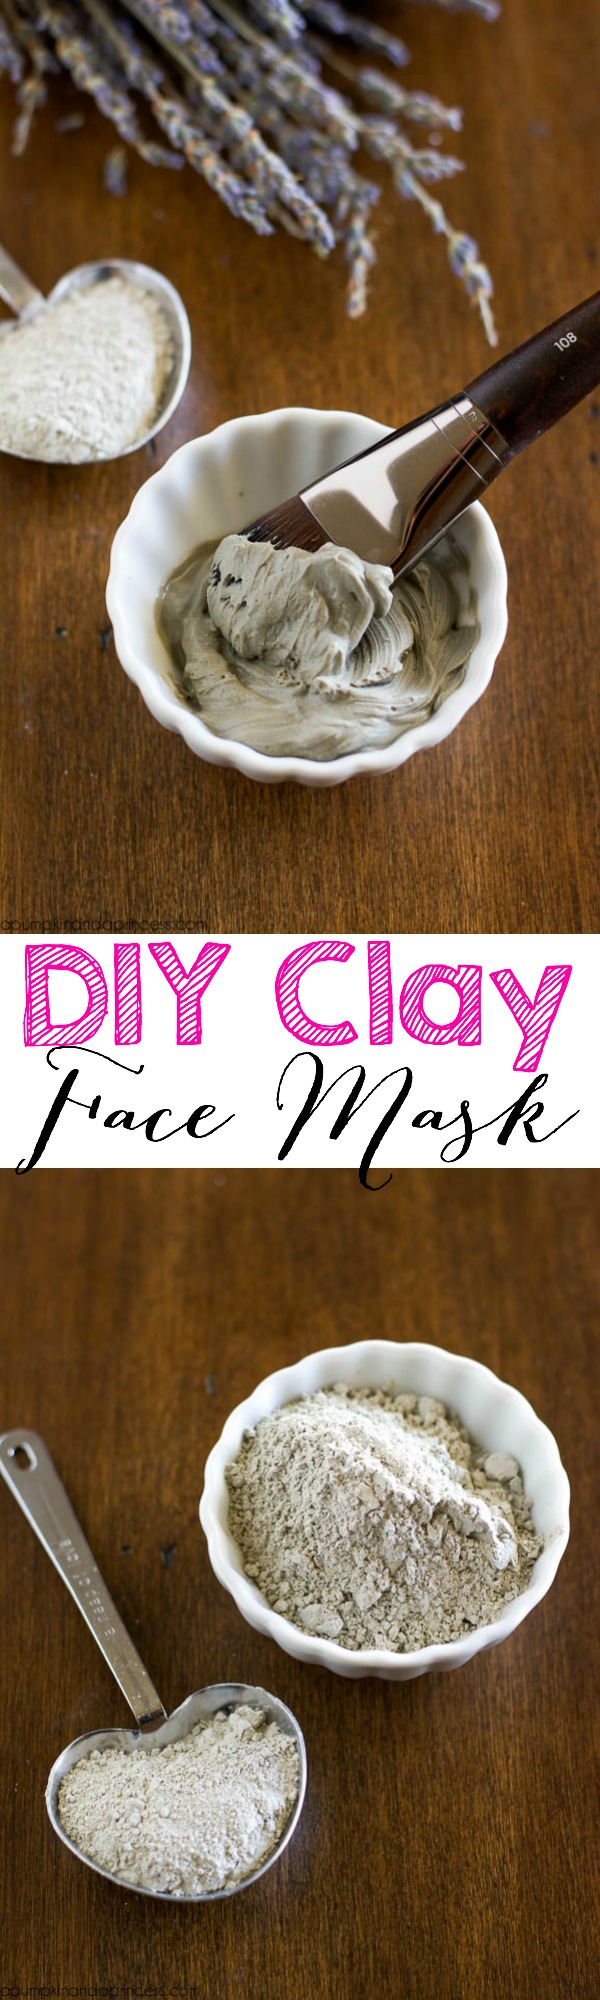 diy And A Pumpkin A  Face  mask face best for Mask Princess DIY pimples Clay